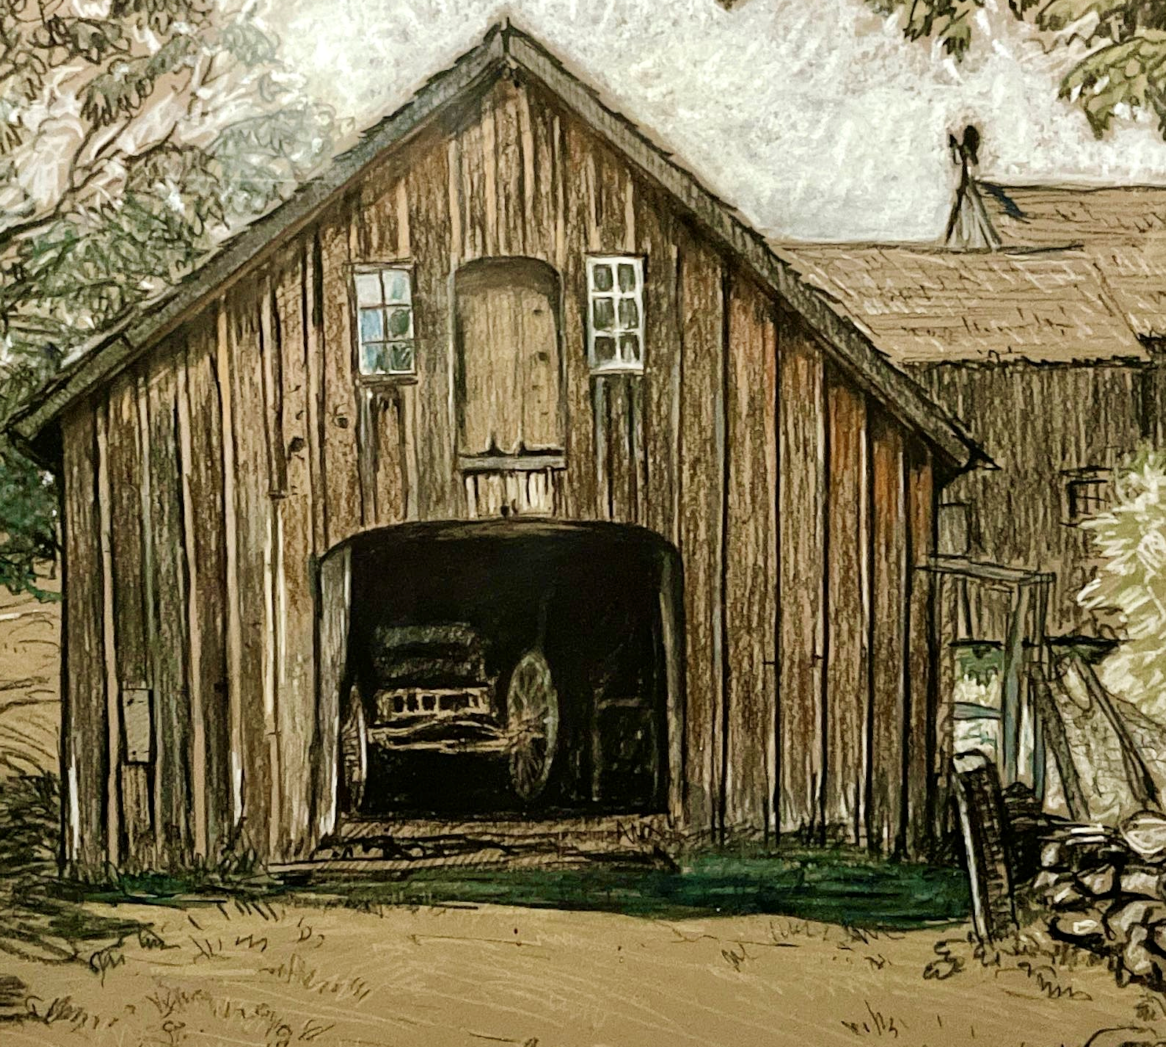 Close up of the barn from a different picture